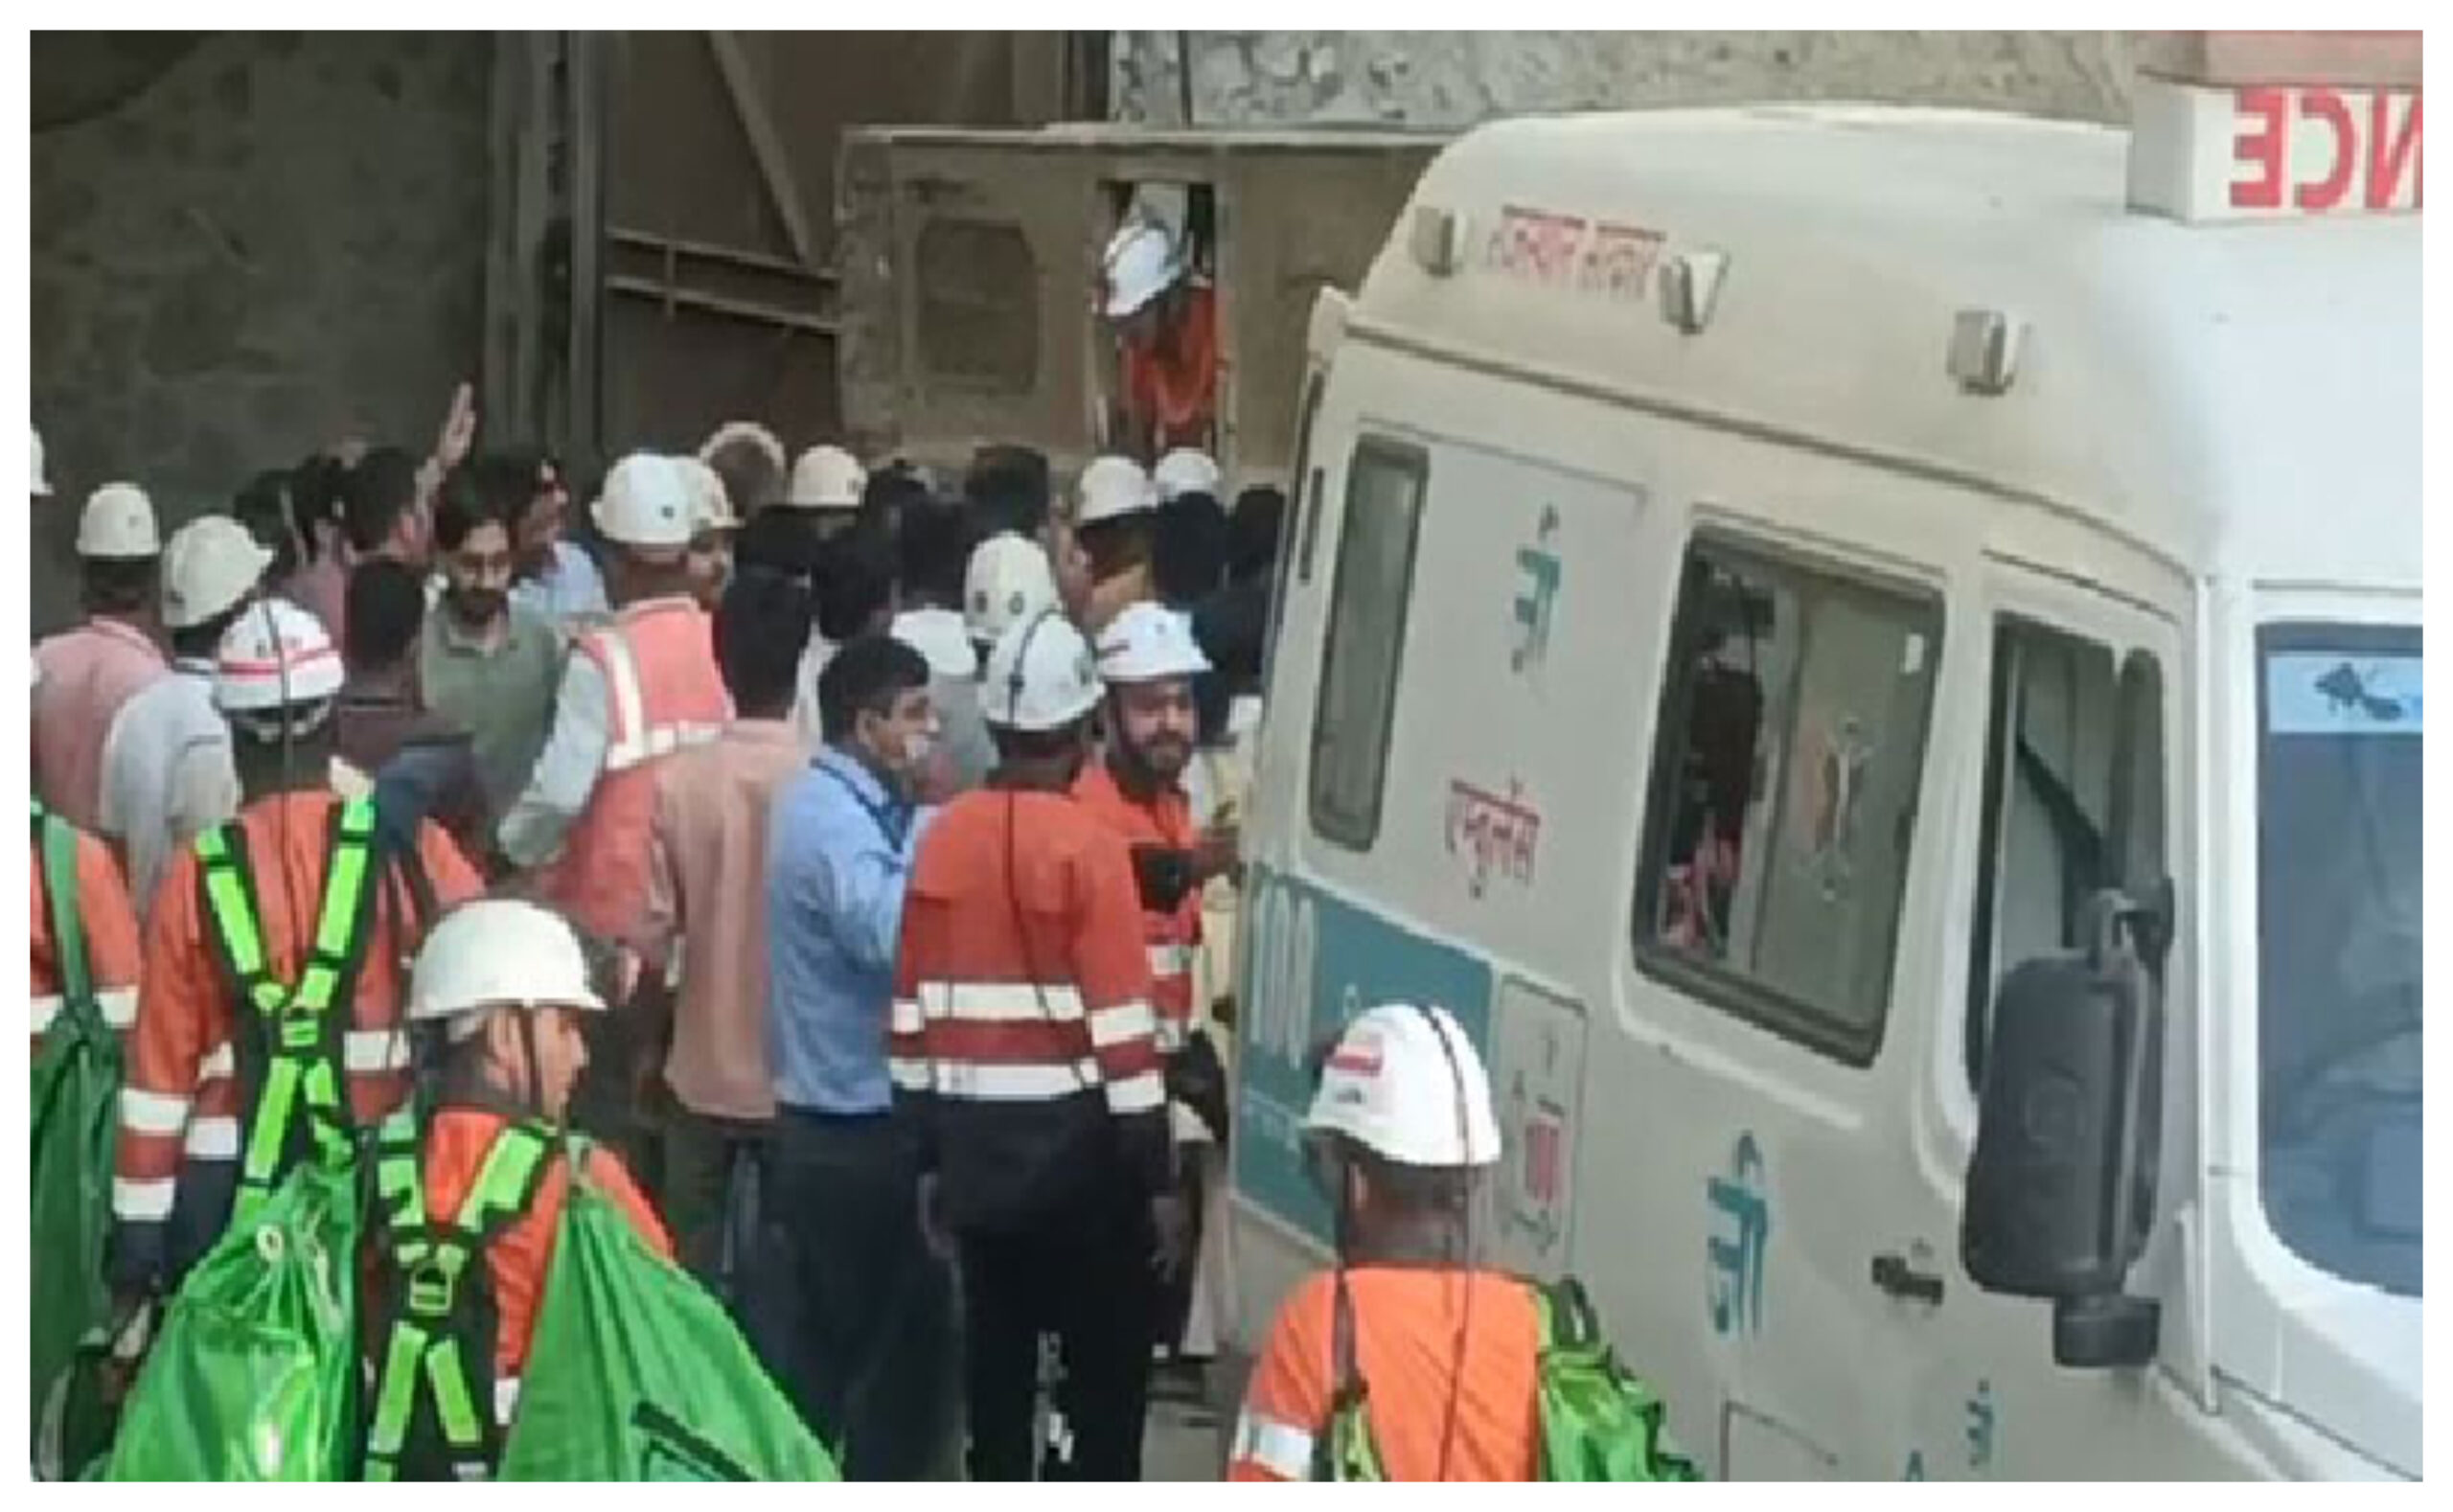 Jhunjhunu: 10 officers taken out from the mine lift, rescue operation continues, #rajasthan, #kolihan, #accident, #copper, #jhunjhunu, #bignews, #BreakingNews, #police, #rescue #RescueOperation,Rajasthan Lift Accident, Kolihan Lift Accident, Hindustan Copper Limited Lift Update, Vigilance Team Officer Trapped in Lift, Jhunjhunu Lift Accident Update, Big News of Rajasthan-totaltv live, total news in hindi